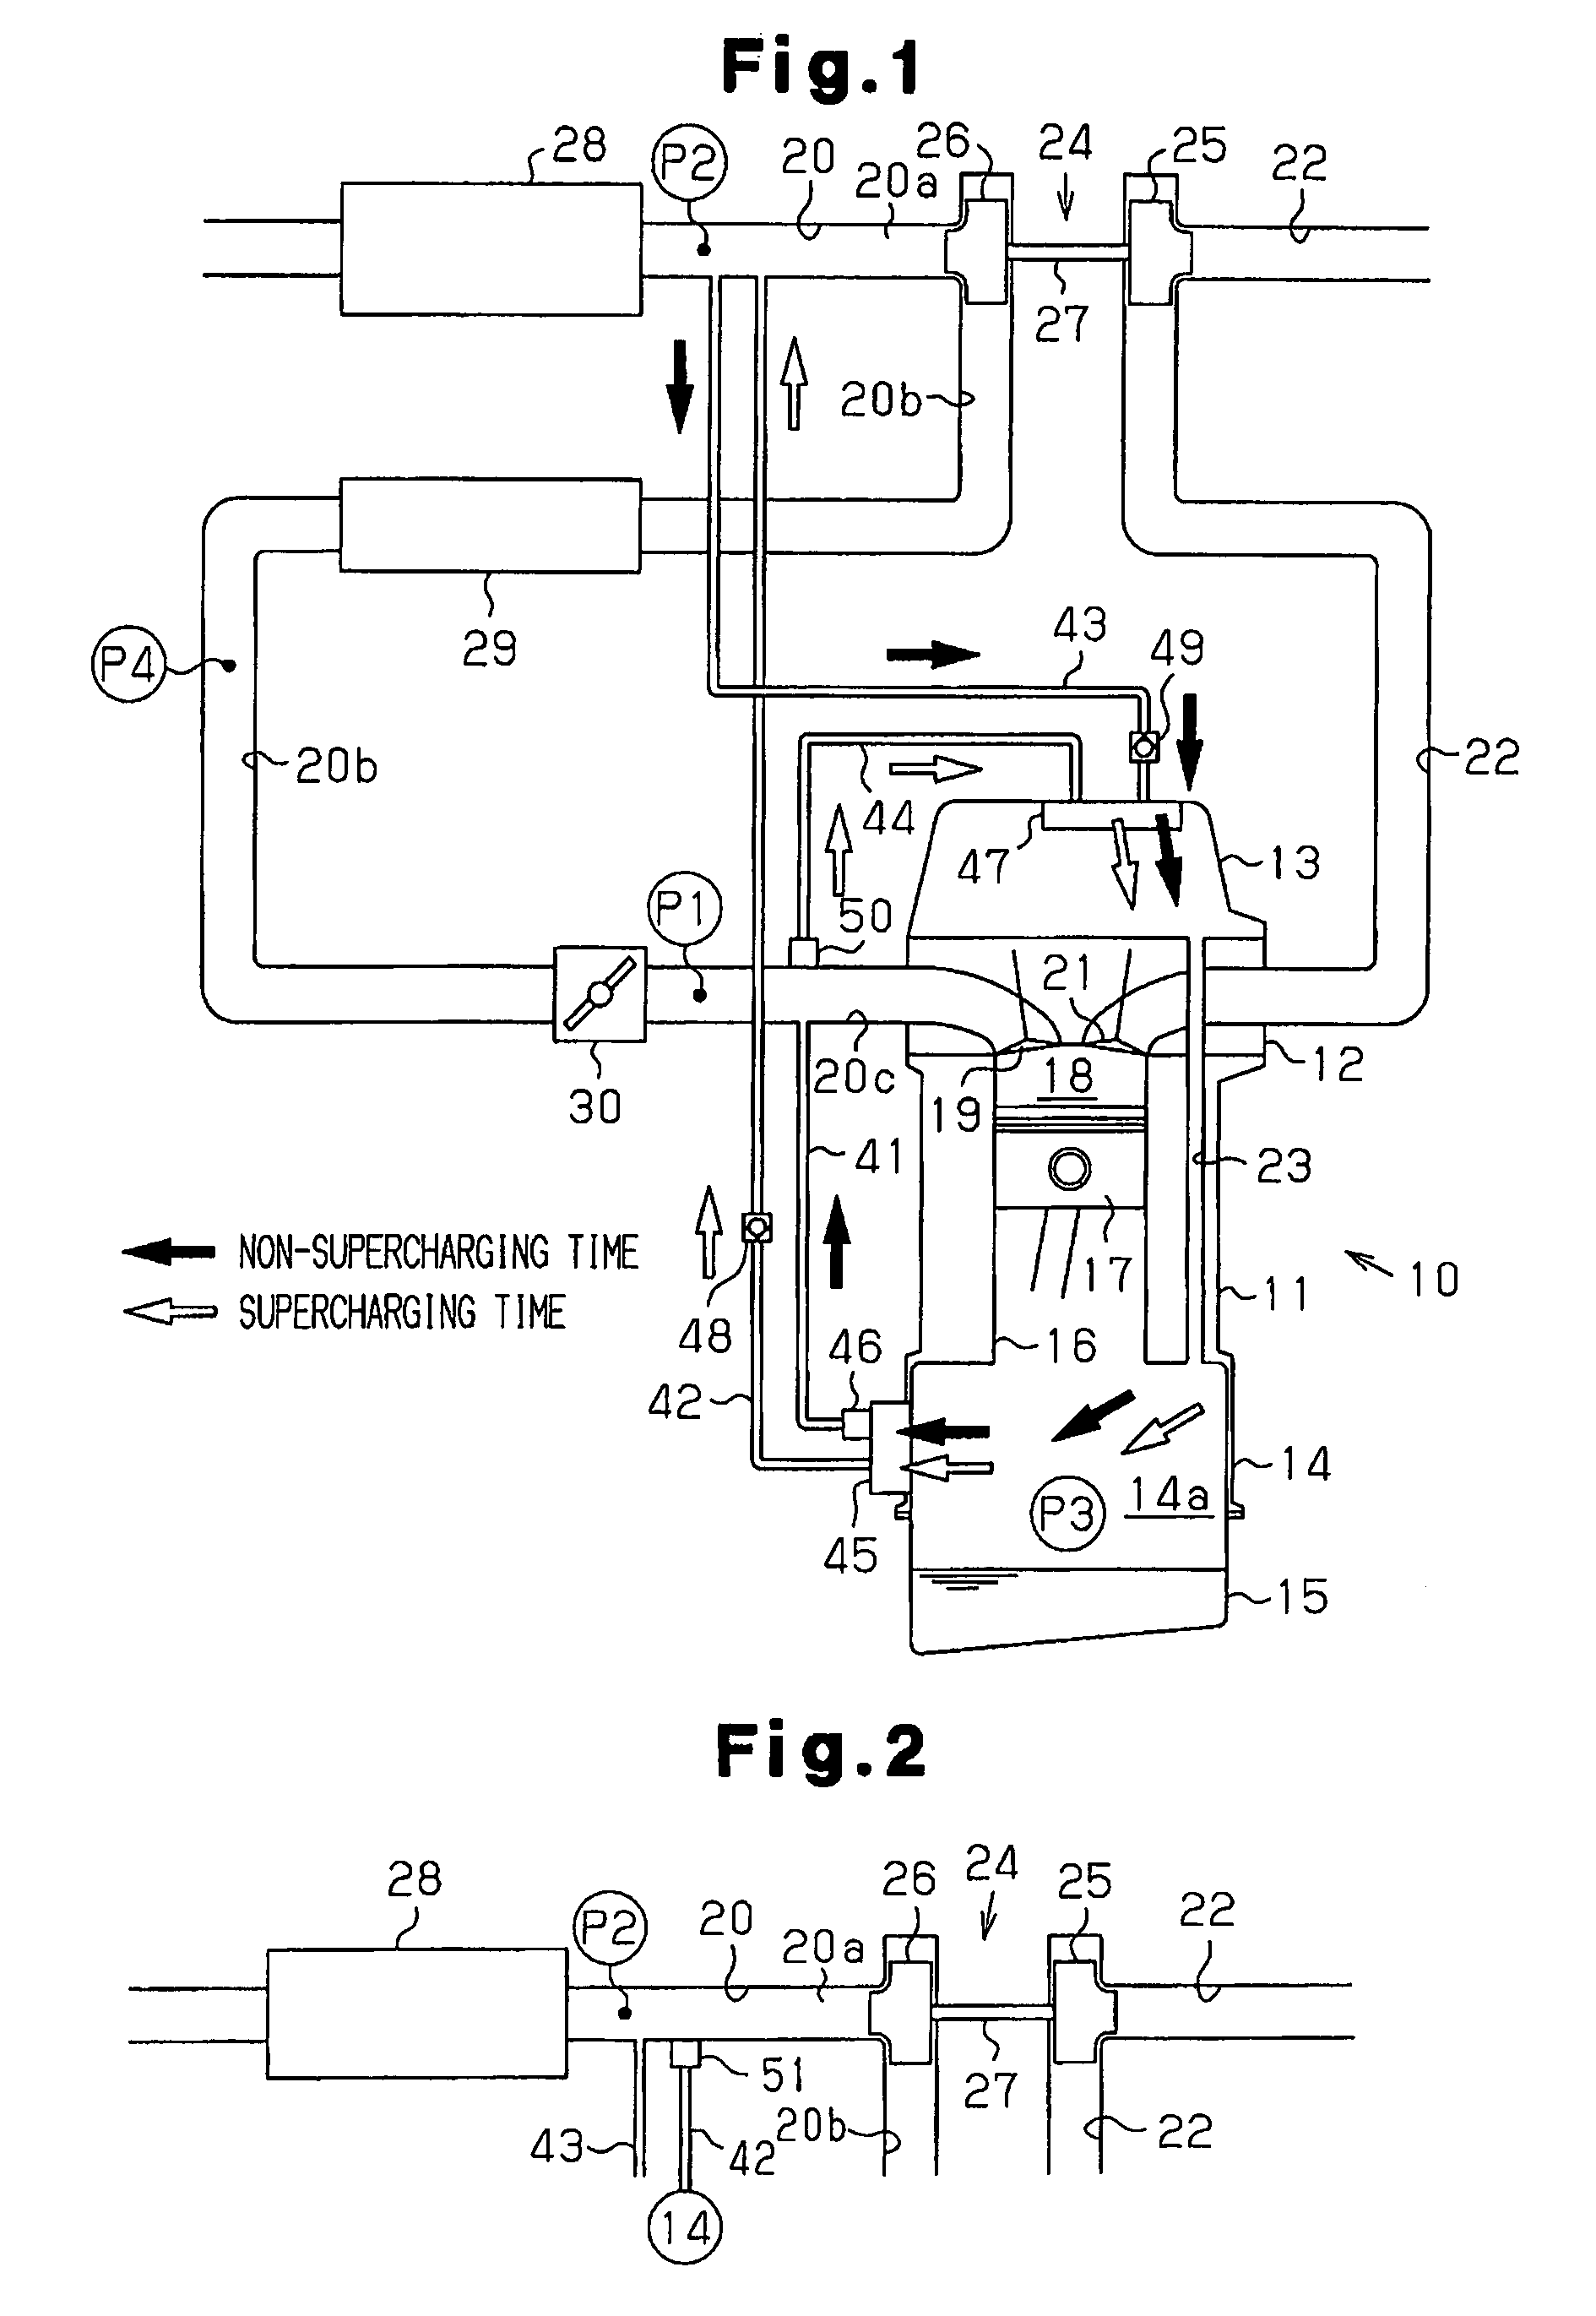 Blow-by gas processing apparatus